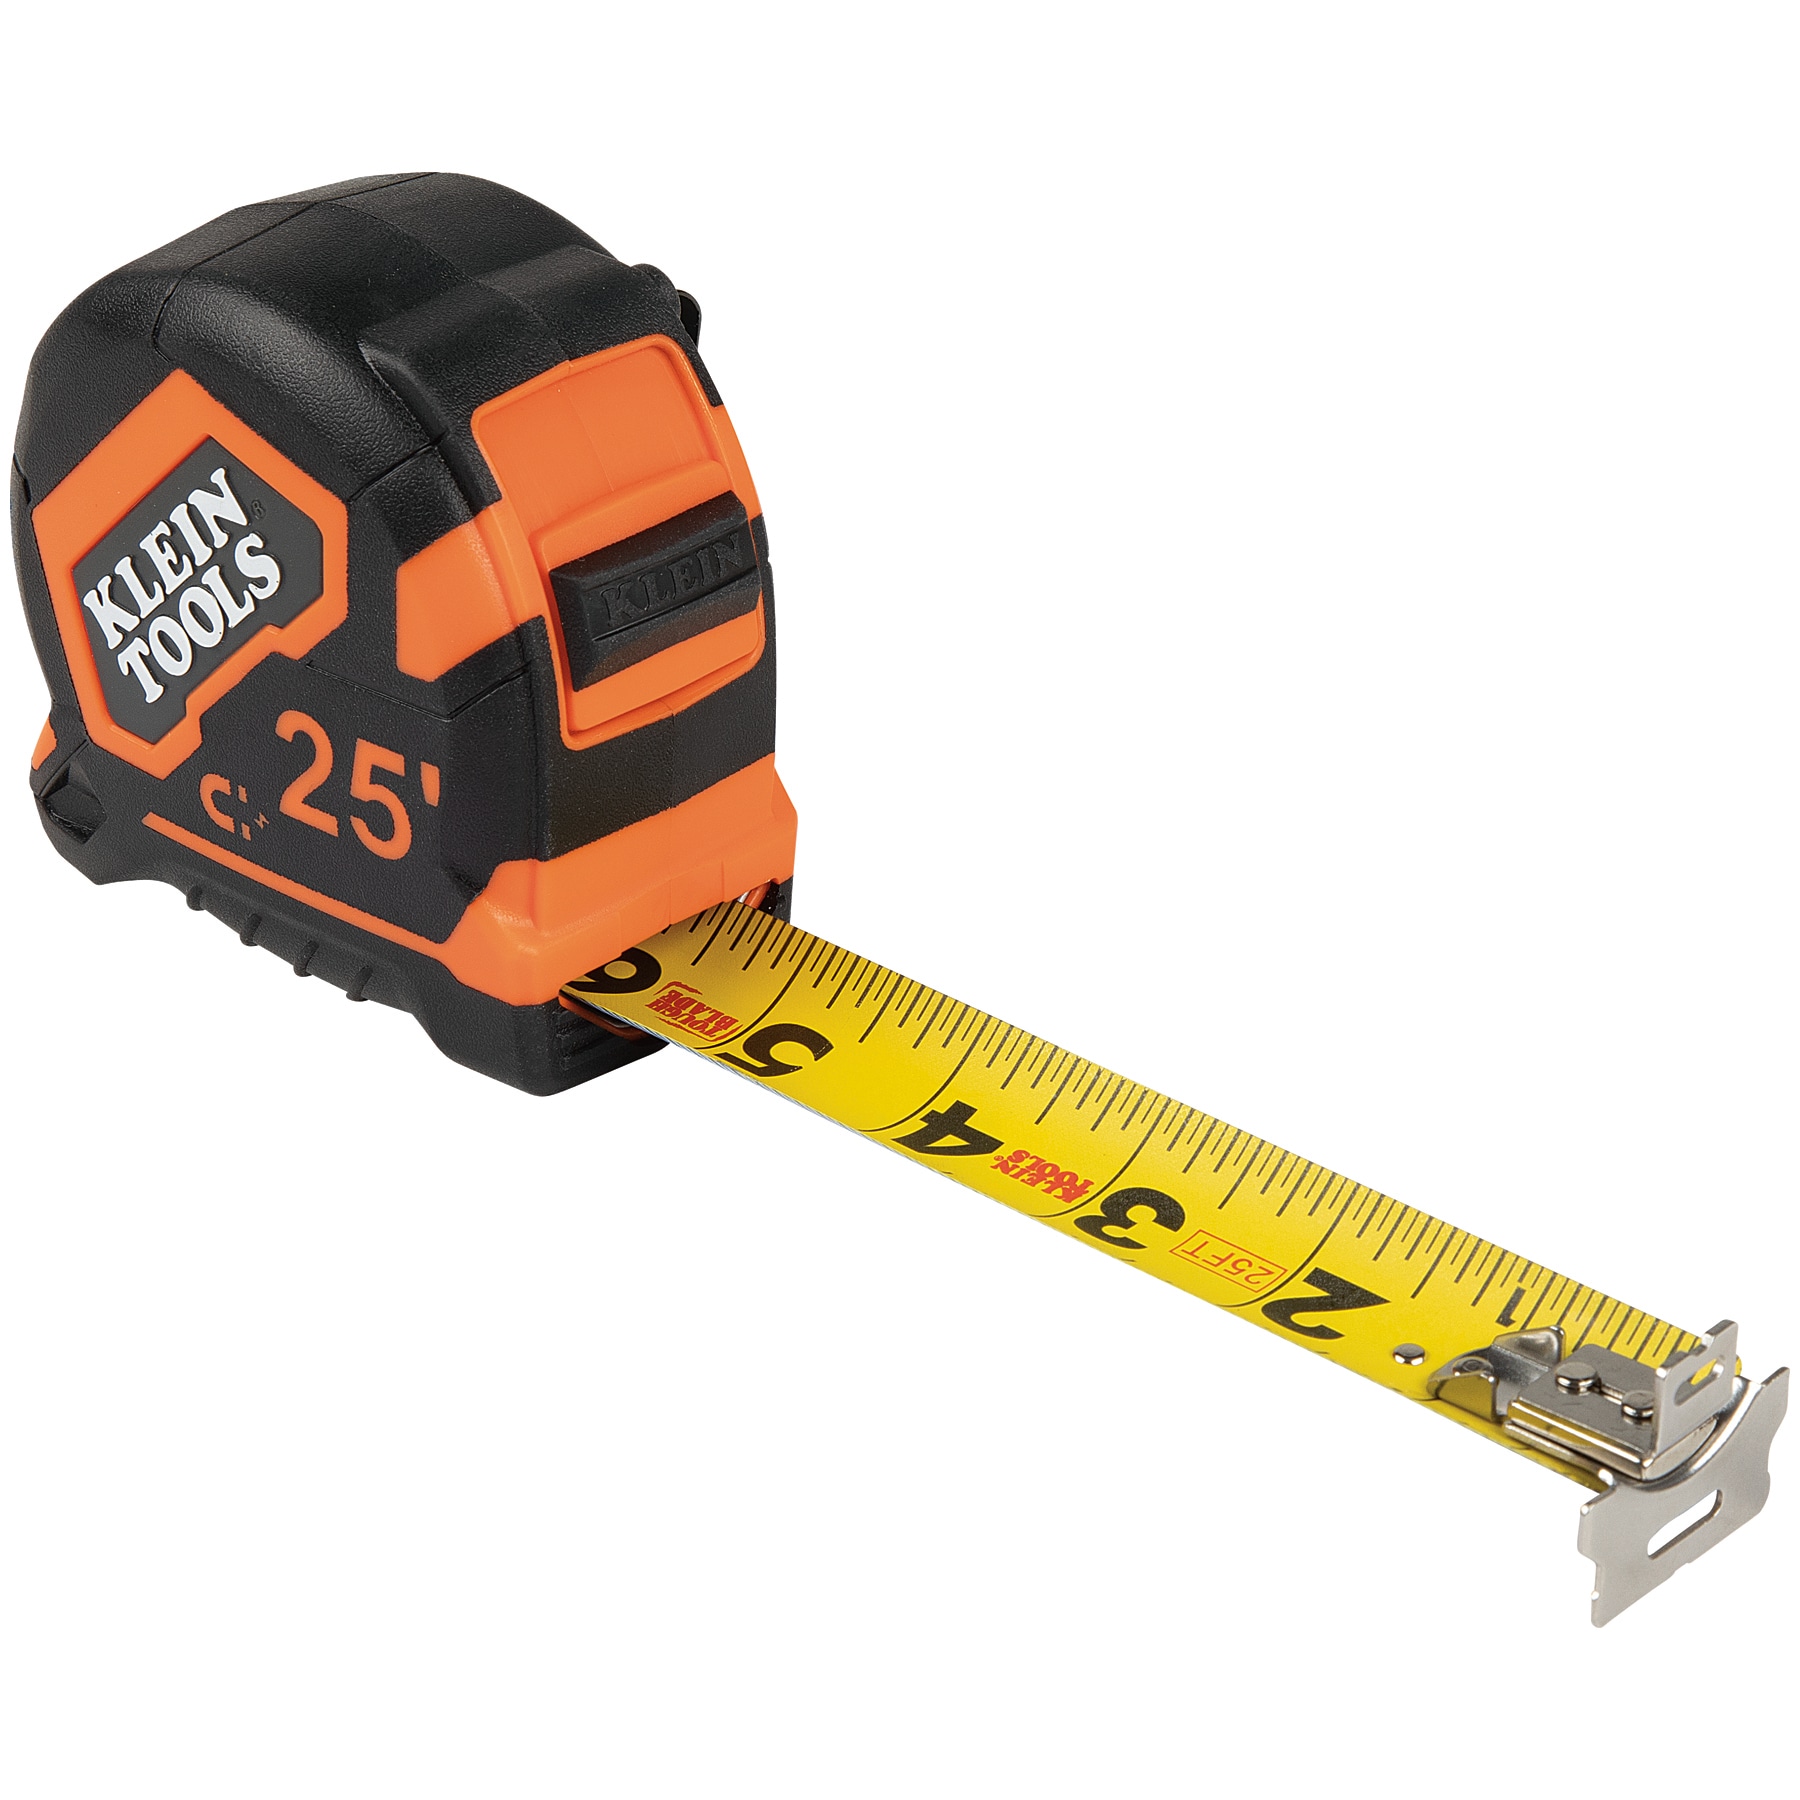 Where's My Tape Measure? 10ft Measuring Tape Retractable - Tape Measure  with Fractions Marked - Measurement Tape 3 Pack of Small Measure Tapes –  Locking, Retrac…